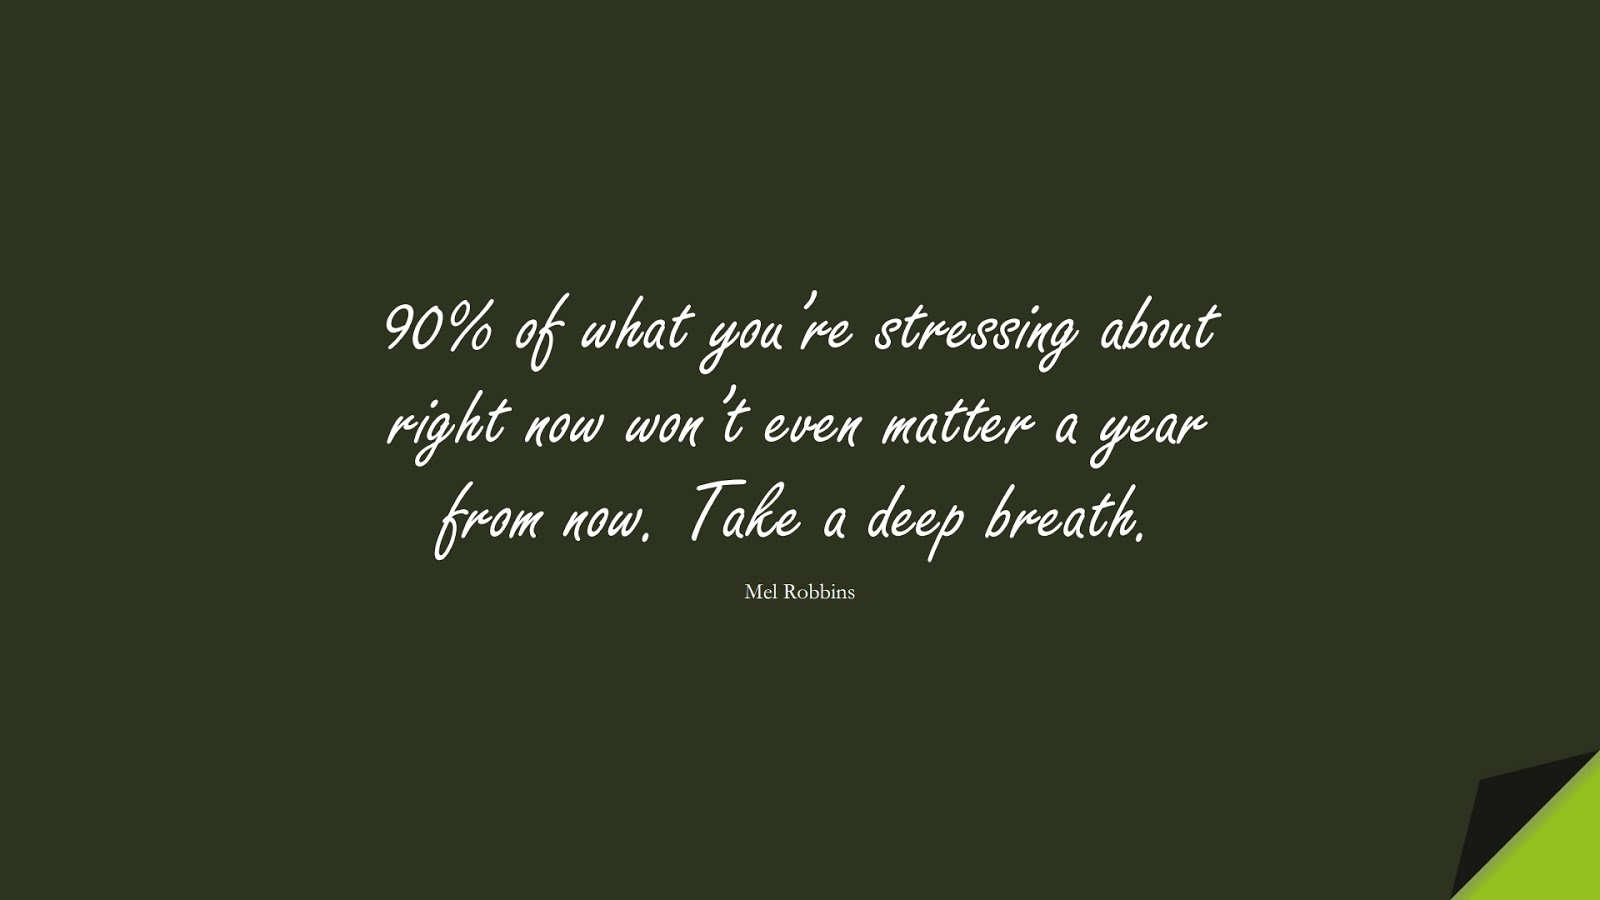 90% of what you’re stressing about right now won’t even matter a year from now. Take a deep breath. (Mel Robbins);  #StressQuotes